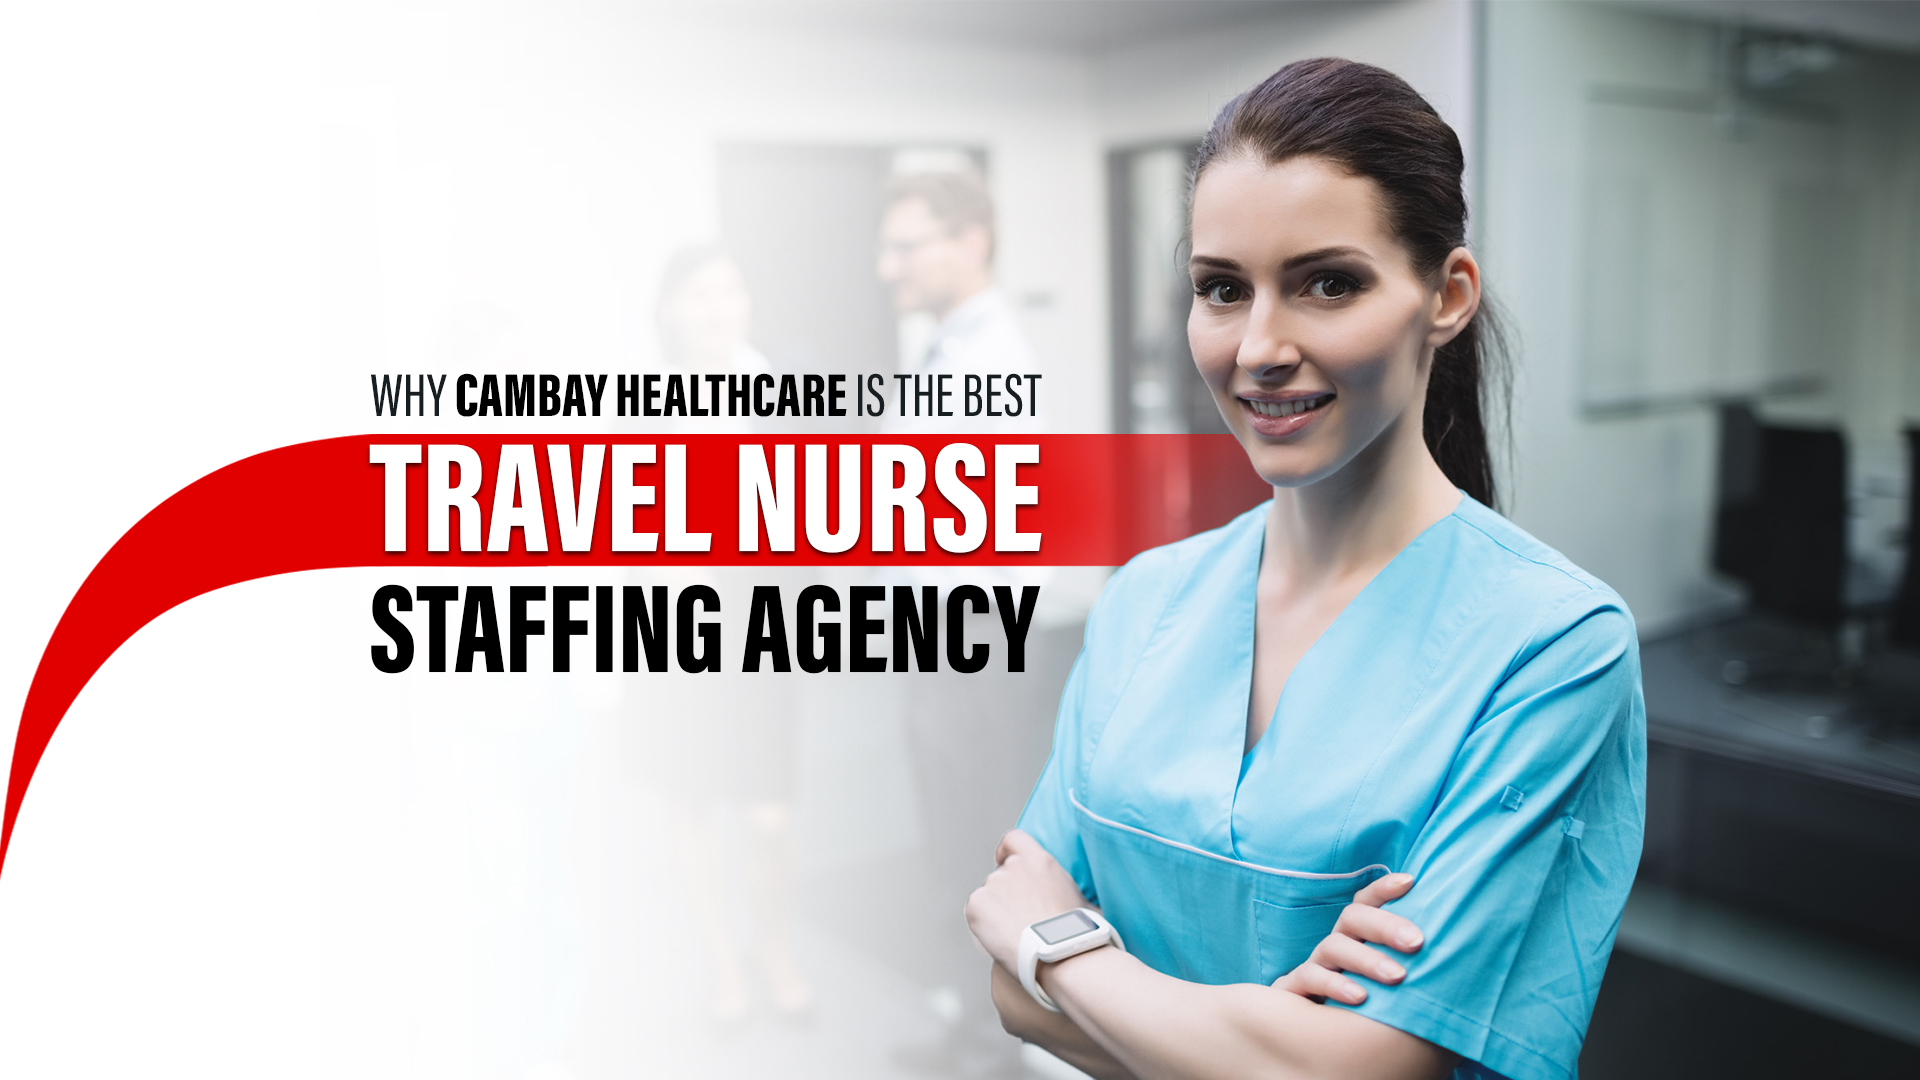 5 Reasons Why Cambay Healthcare is the Best Travel Nurse Staffing Agency for You